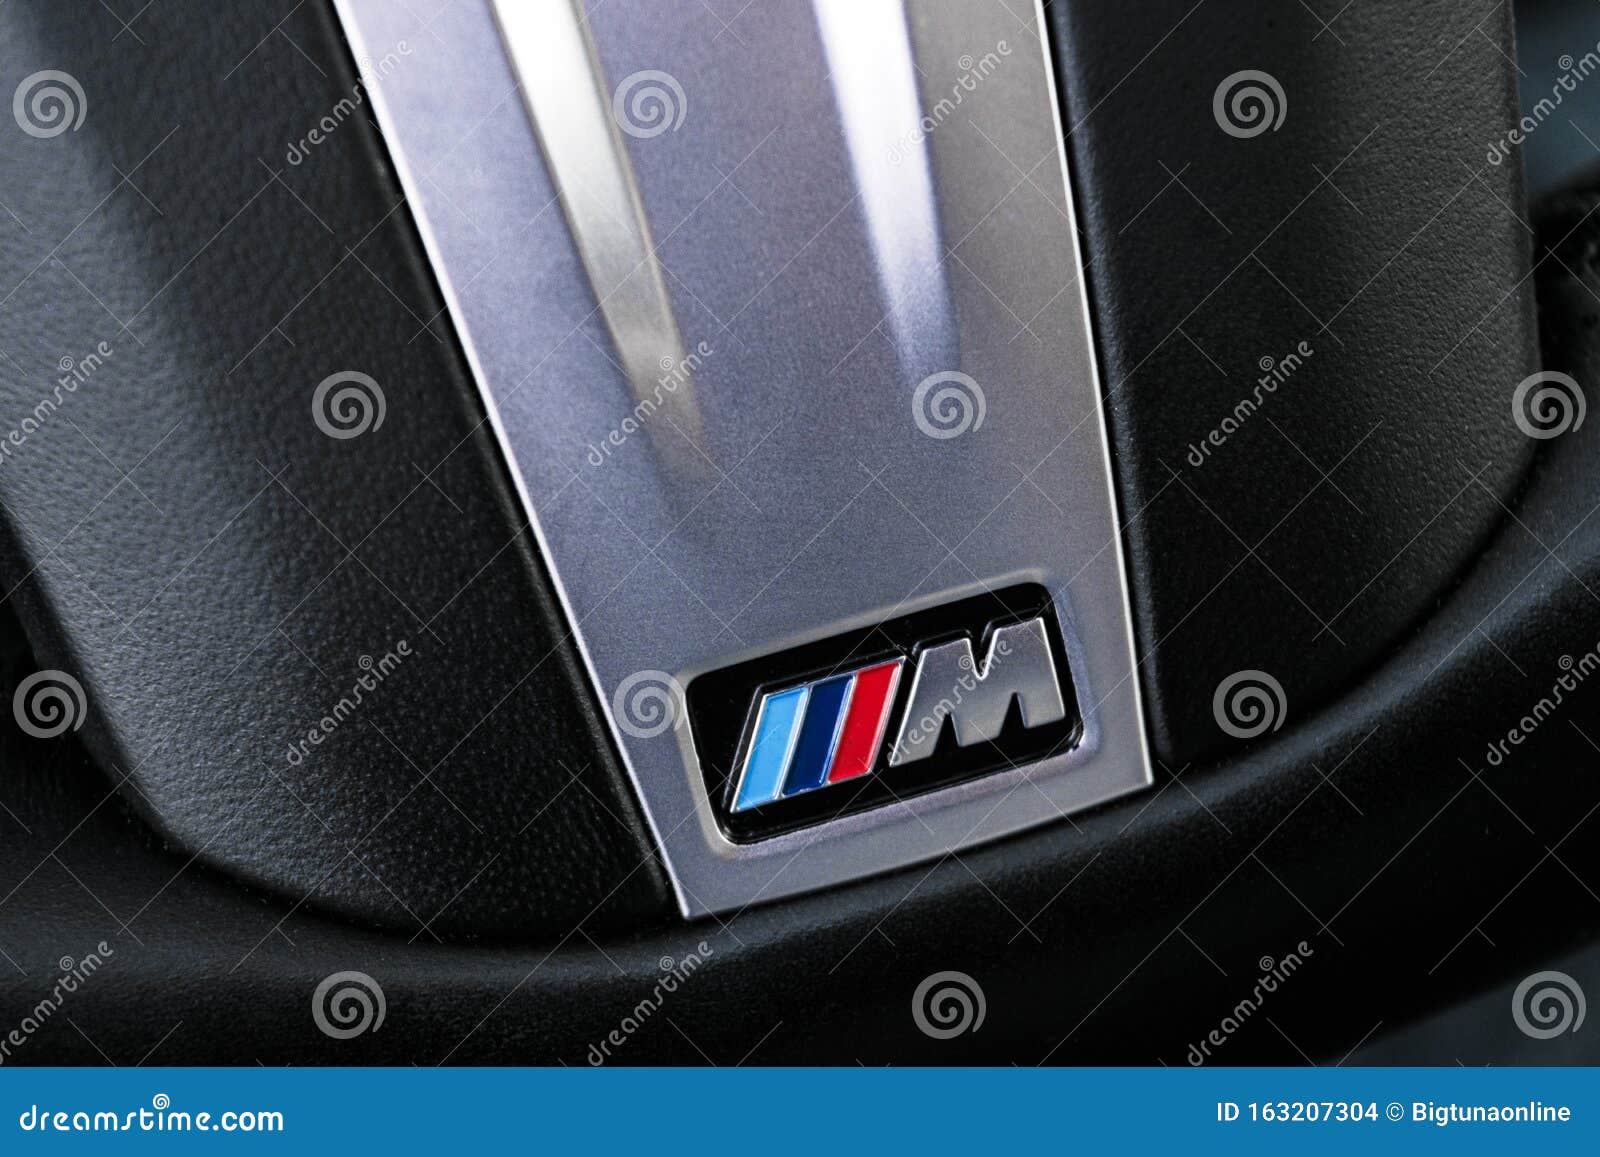 Close Up View of a BMW M Logo on Black Leather Steering Wheel